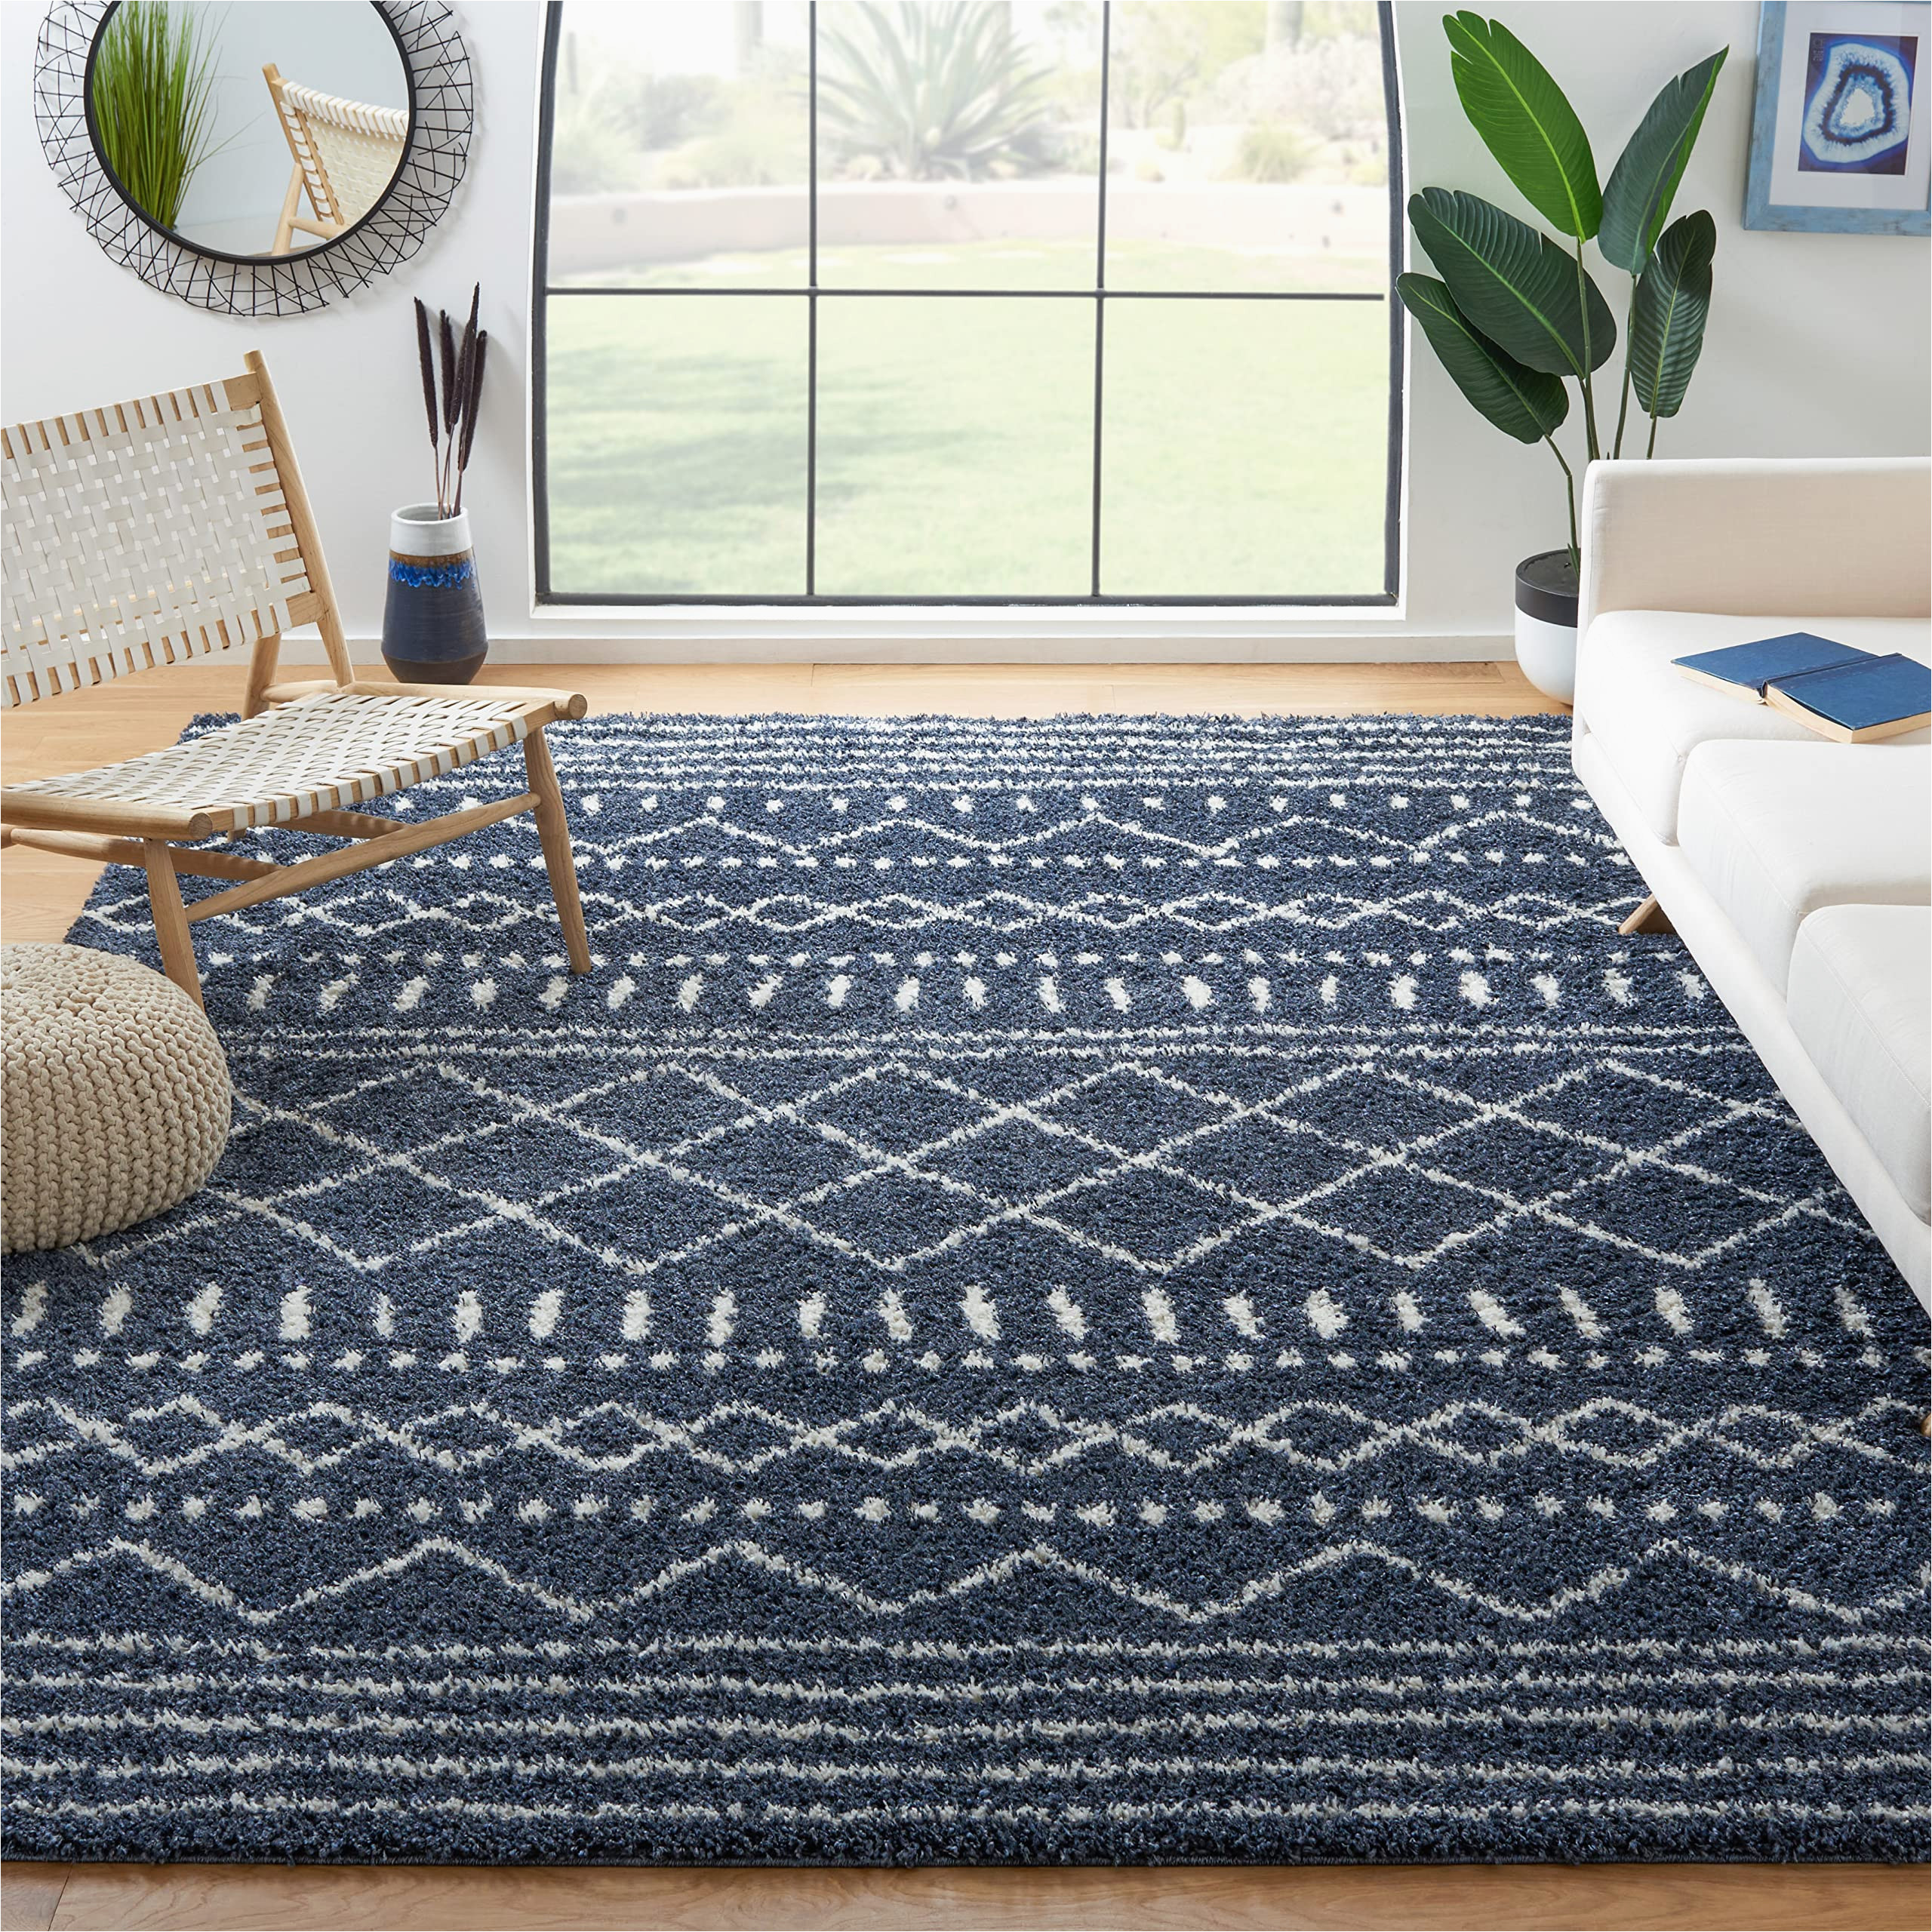 Slate Blue and Cream area Rugs Safavieh Arizona Shag Collection 8′ X 10′ Slate Blue/ivory asg741l Moroccan Non-shedding 1.6-inch Thick Living Room Dining Bedroom area Rug